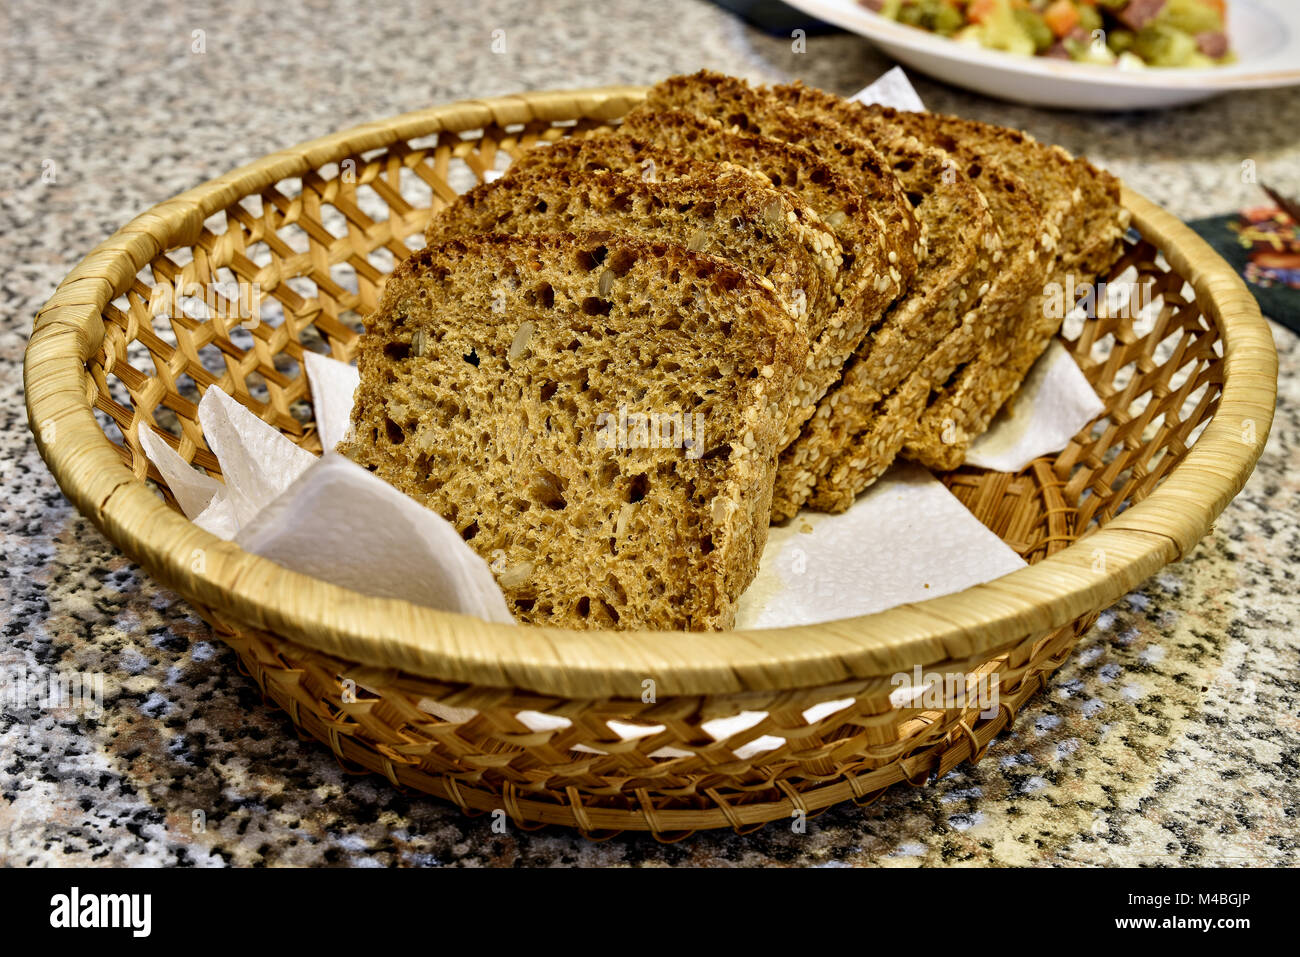 Wicker basket with slices of dietary bread Stock Photo